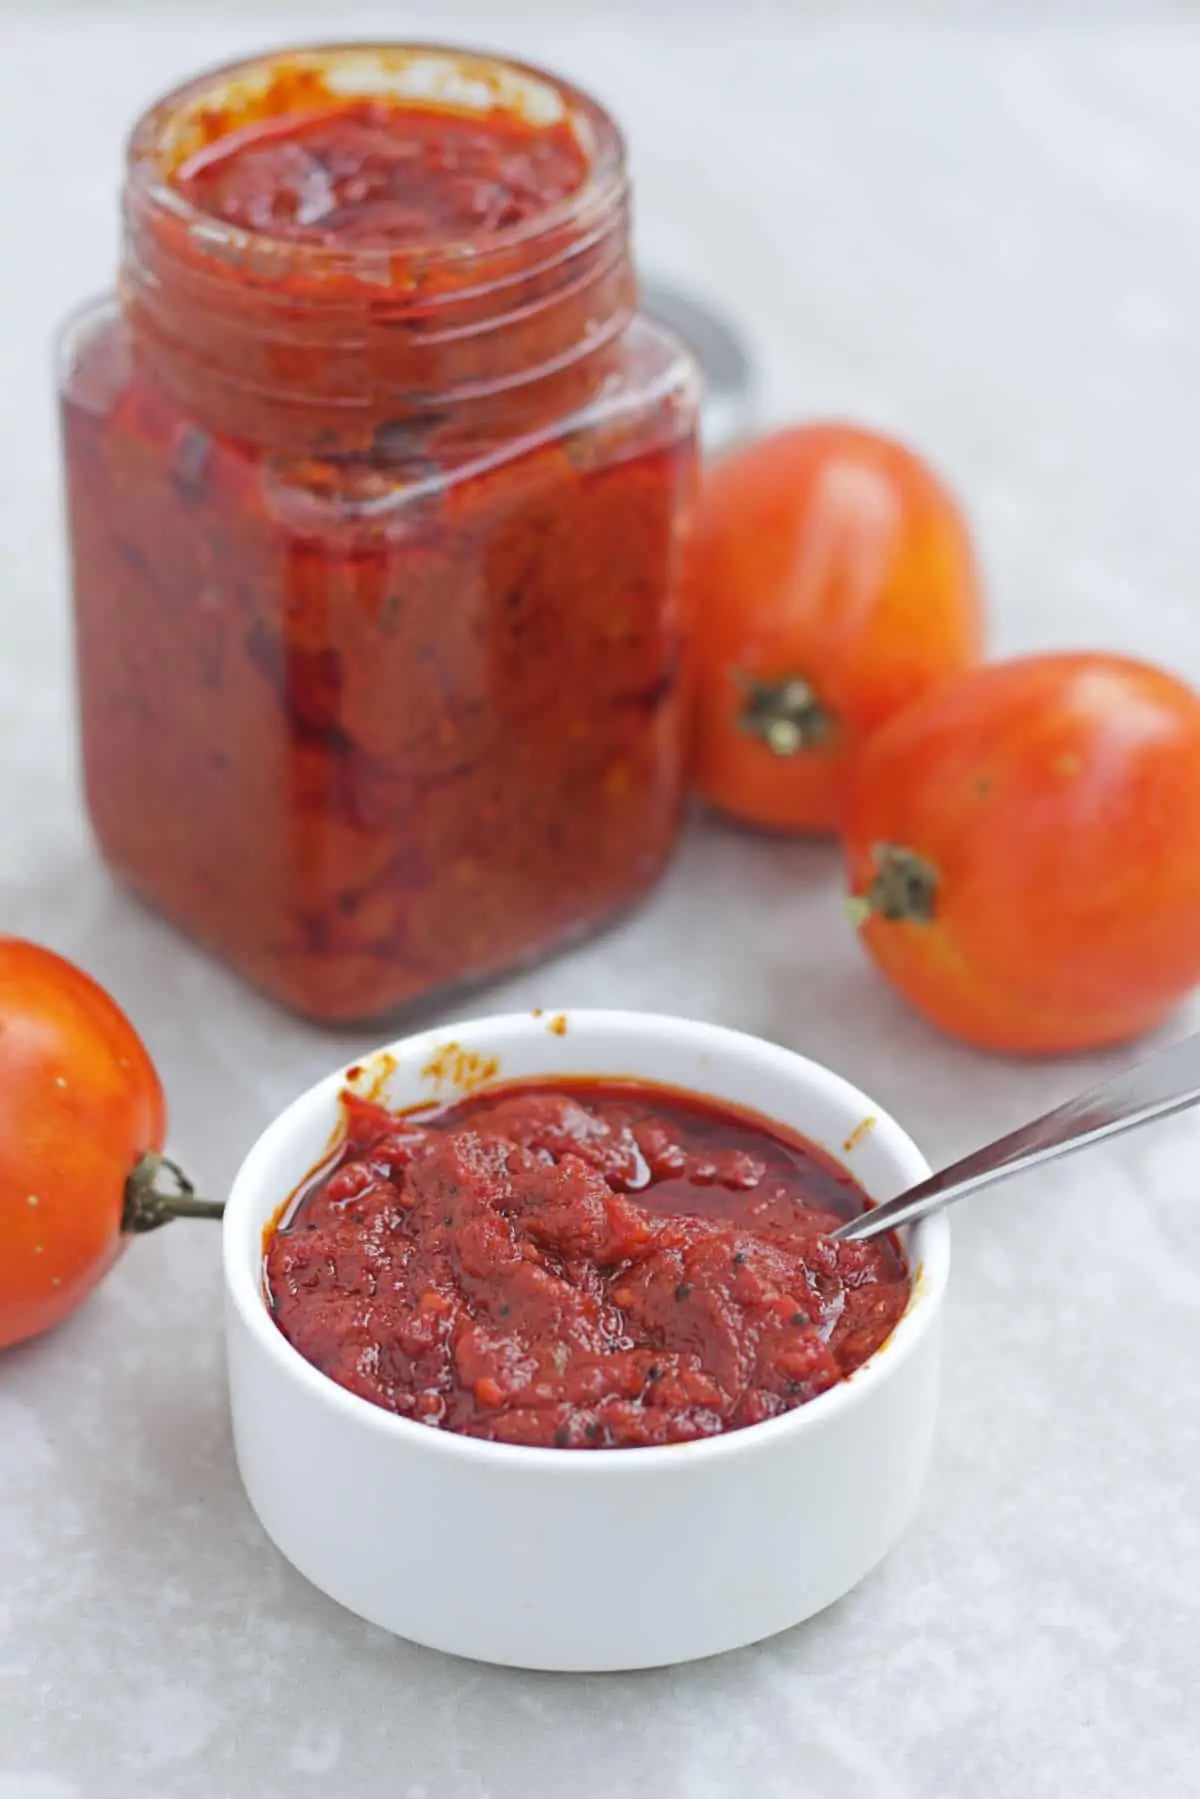 tomato pickle in a bowl with spoon and in a jar with tomatoes in the background.